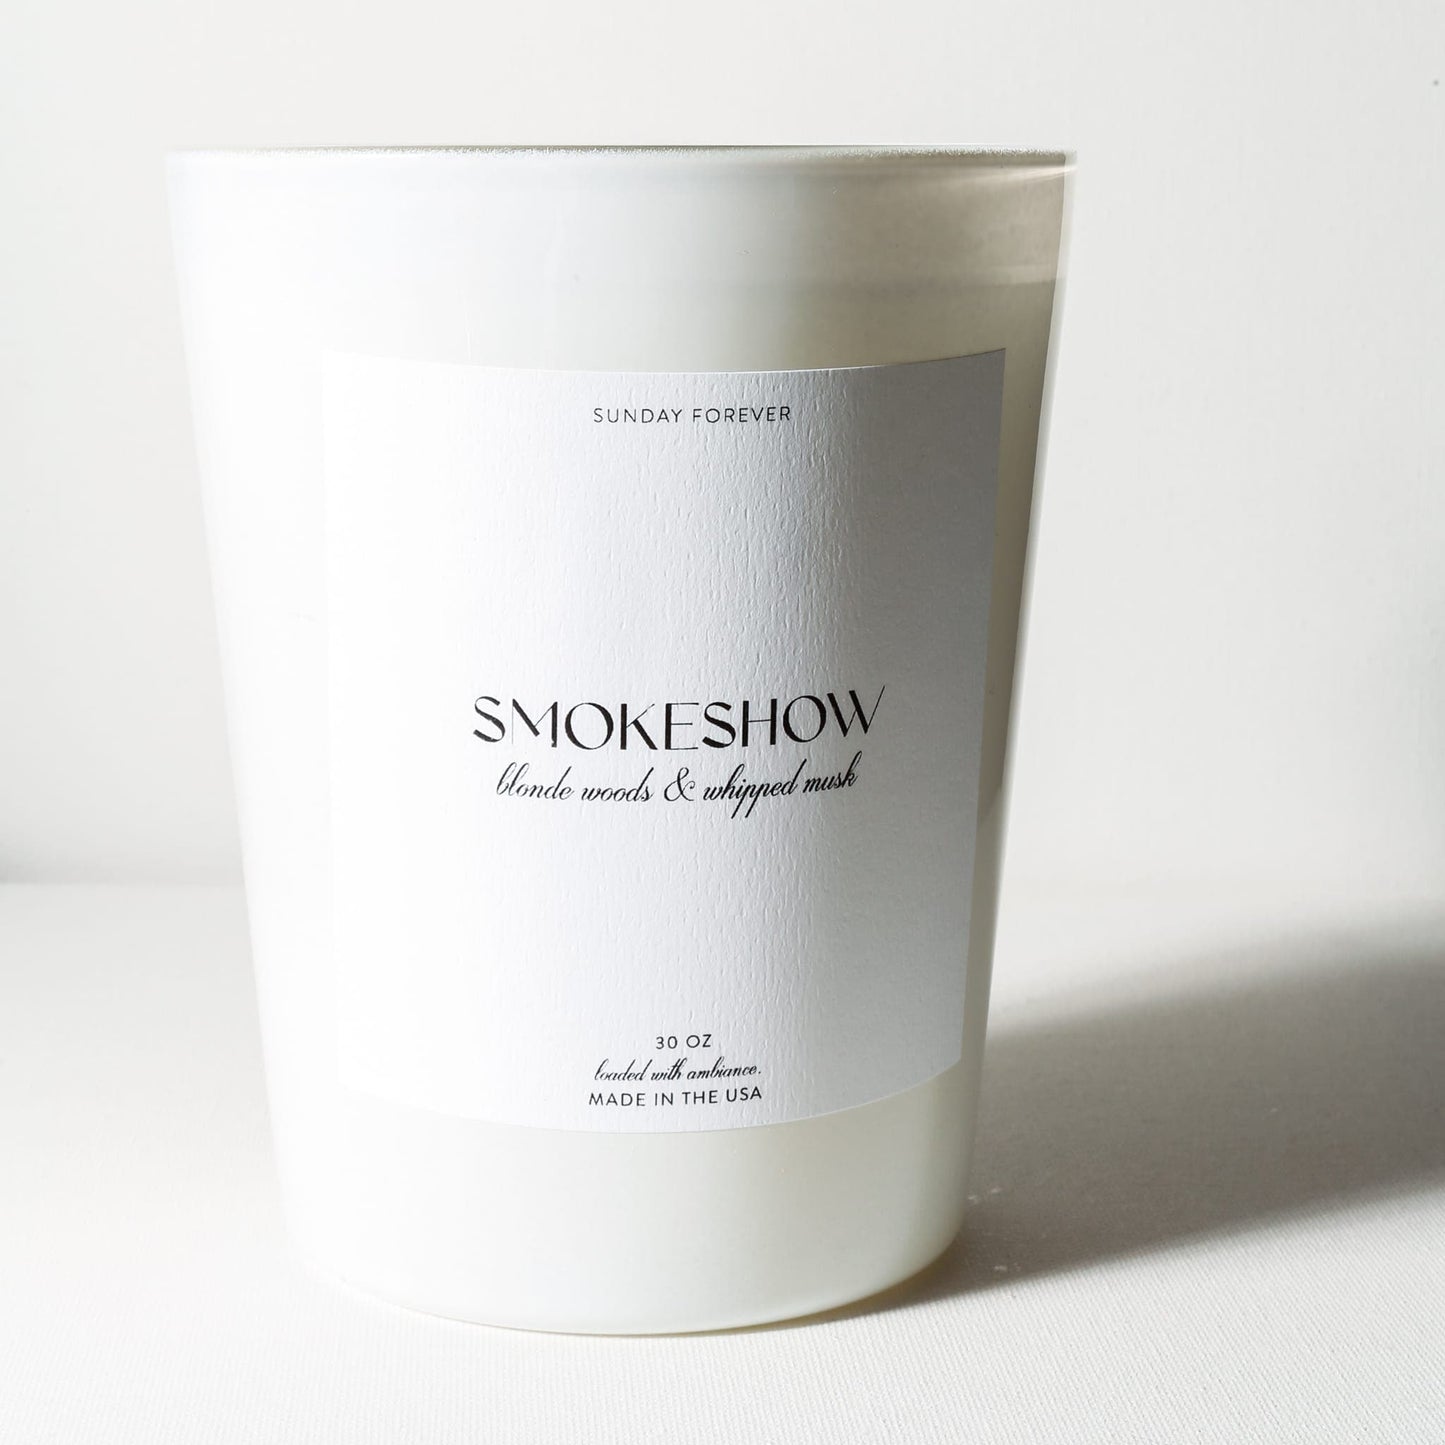 Sunday Forever Candle Smokeshow Luxury Candle with Blonde Woods and Whipped Musk